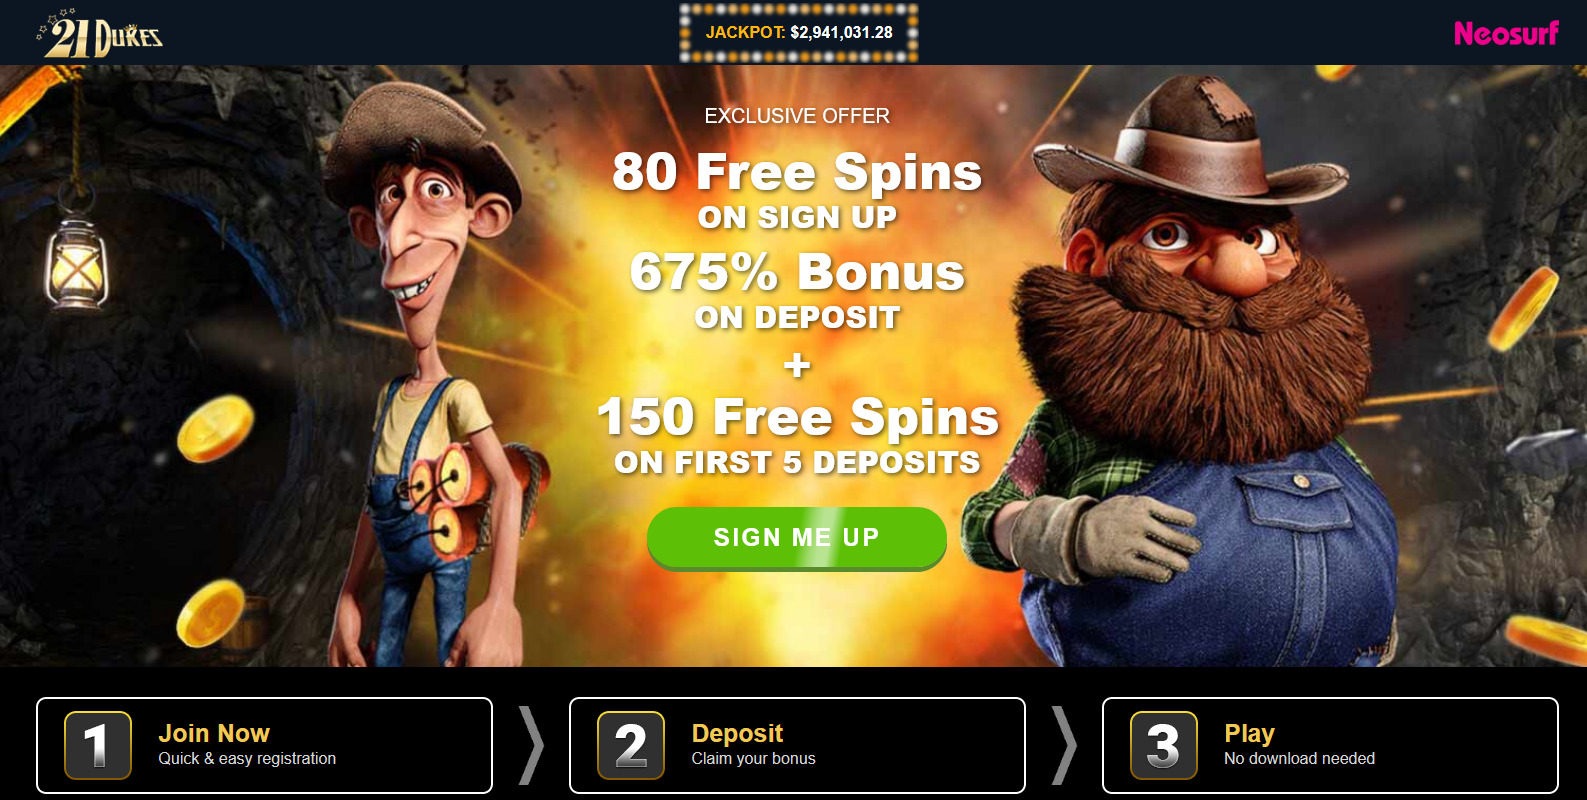 21Dukes - Jackpot - 80 FS on SU + 750 Free Spins on First 5 Depos